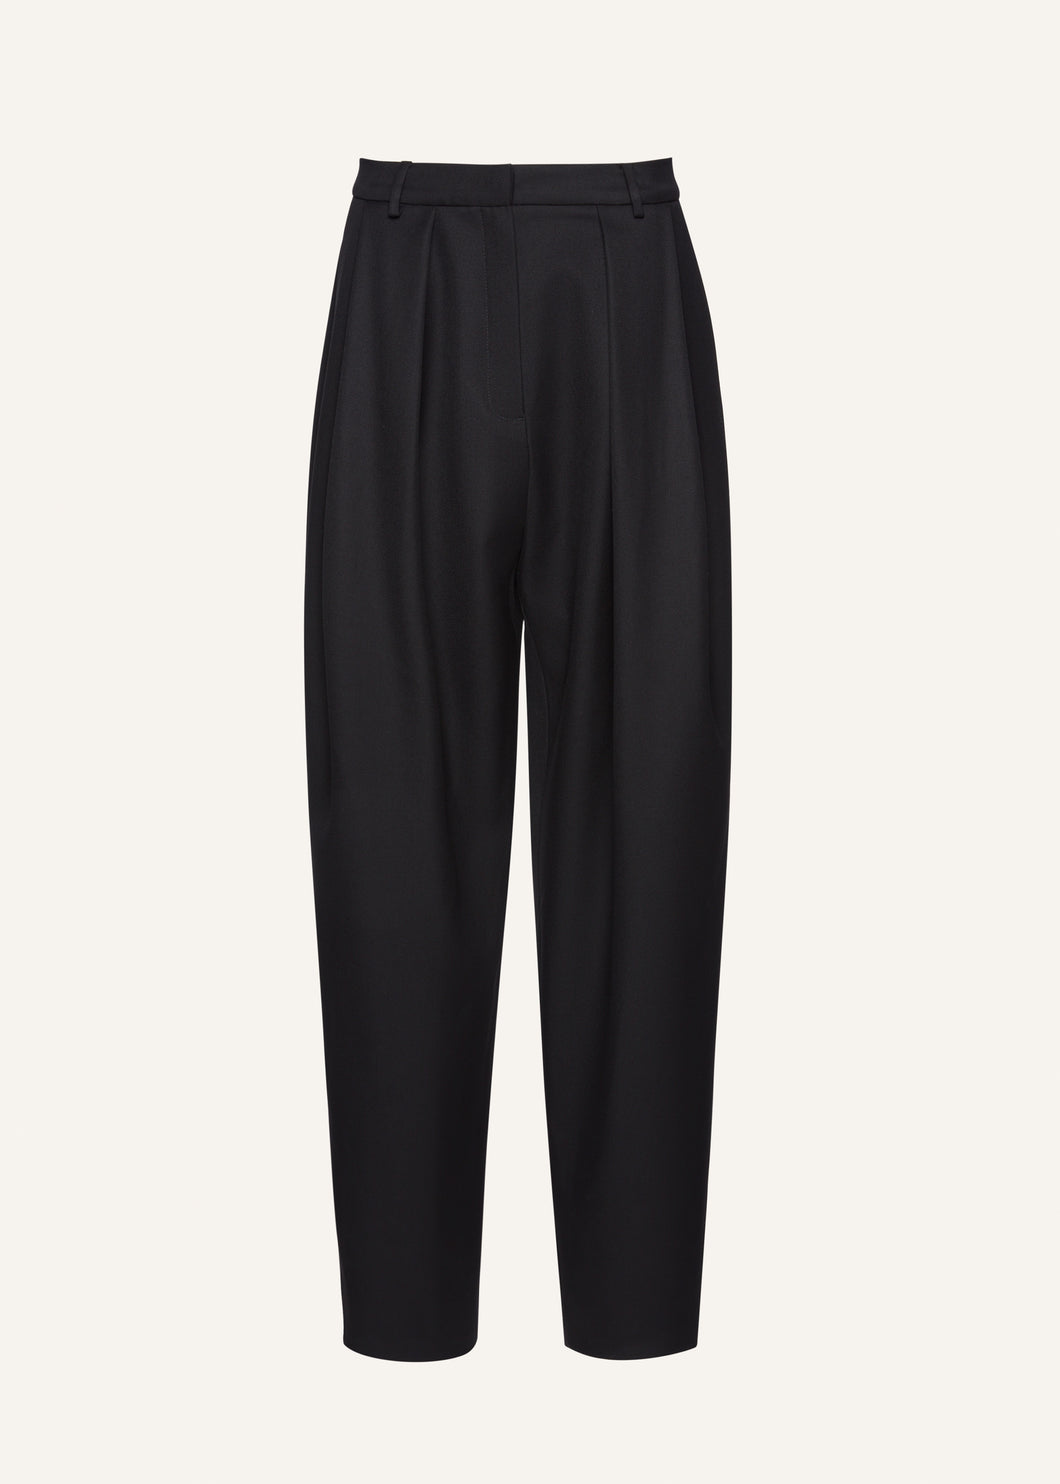 Tapered wool trousers in black